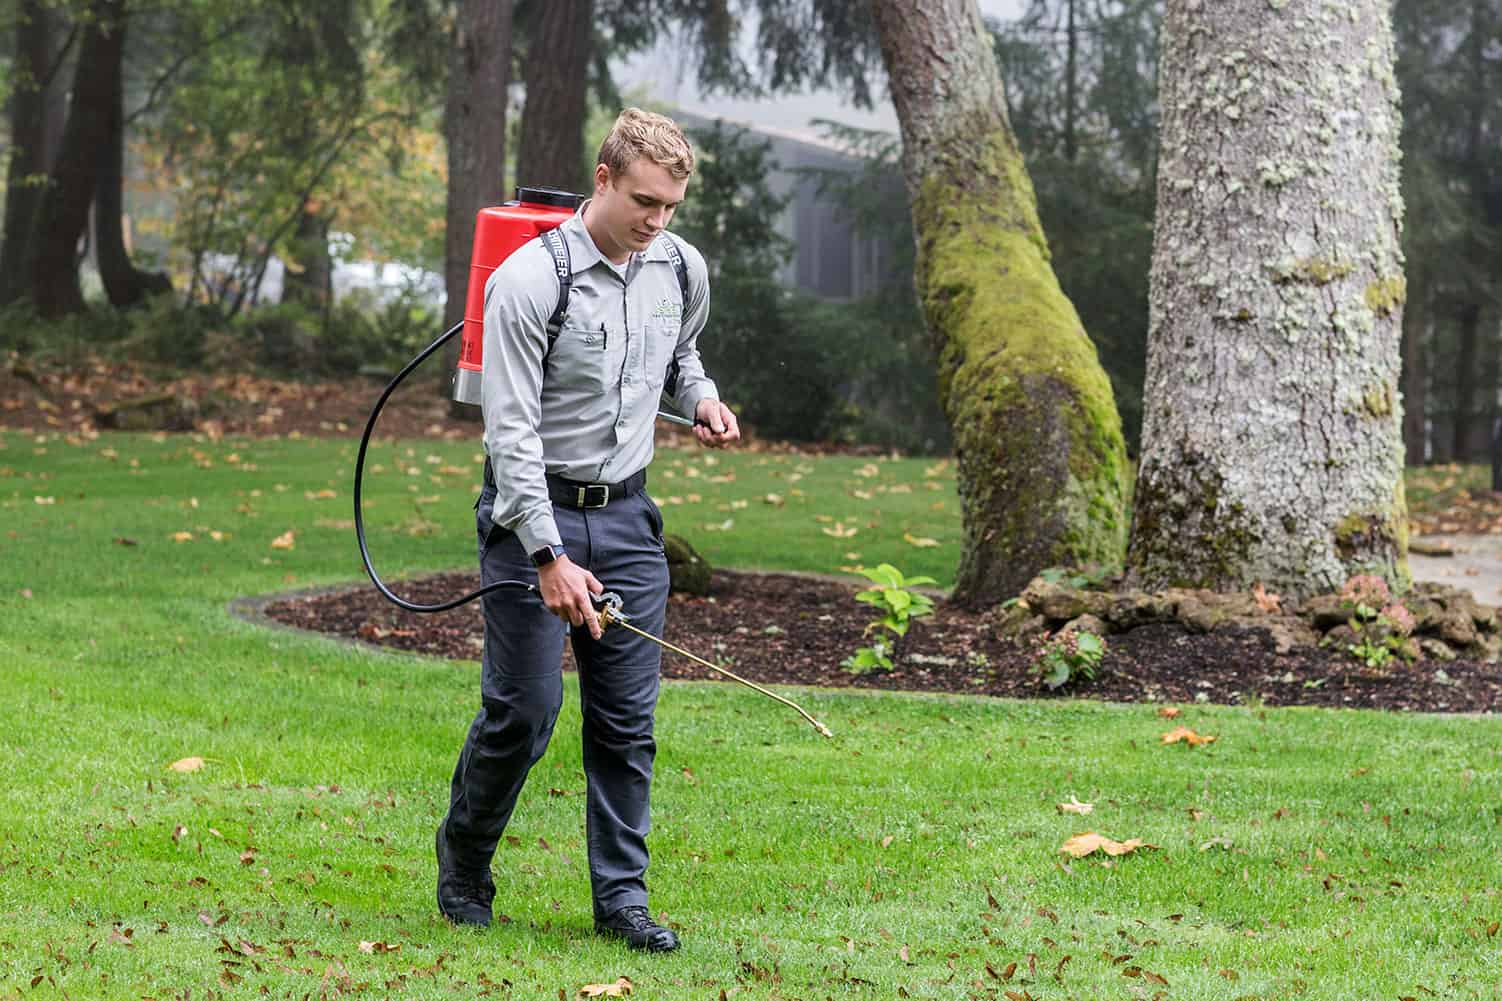 Aspen Pest Control Technician Treating a Vancouver WA Yard with Green Pest Control Product